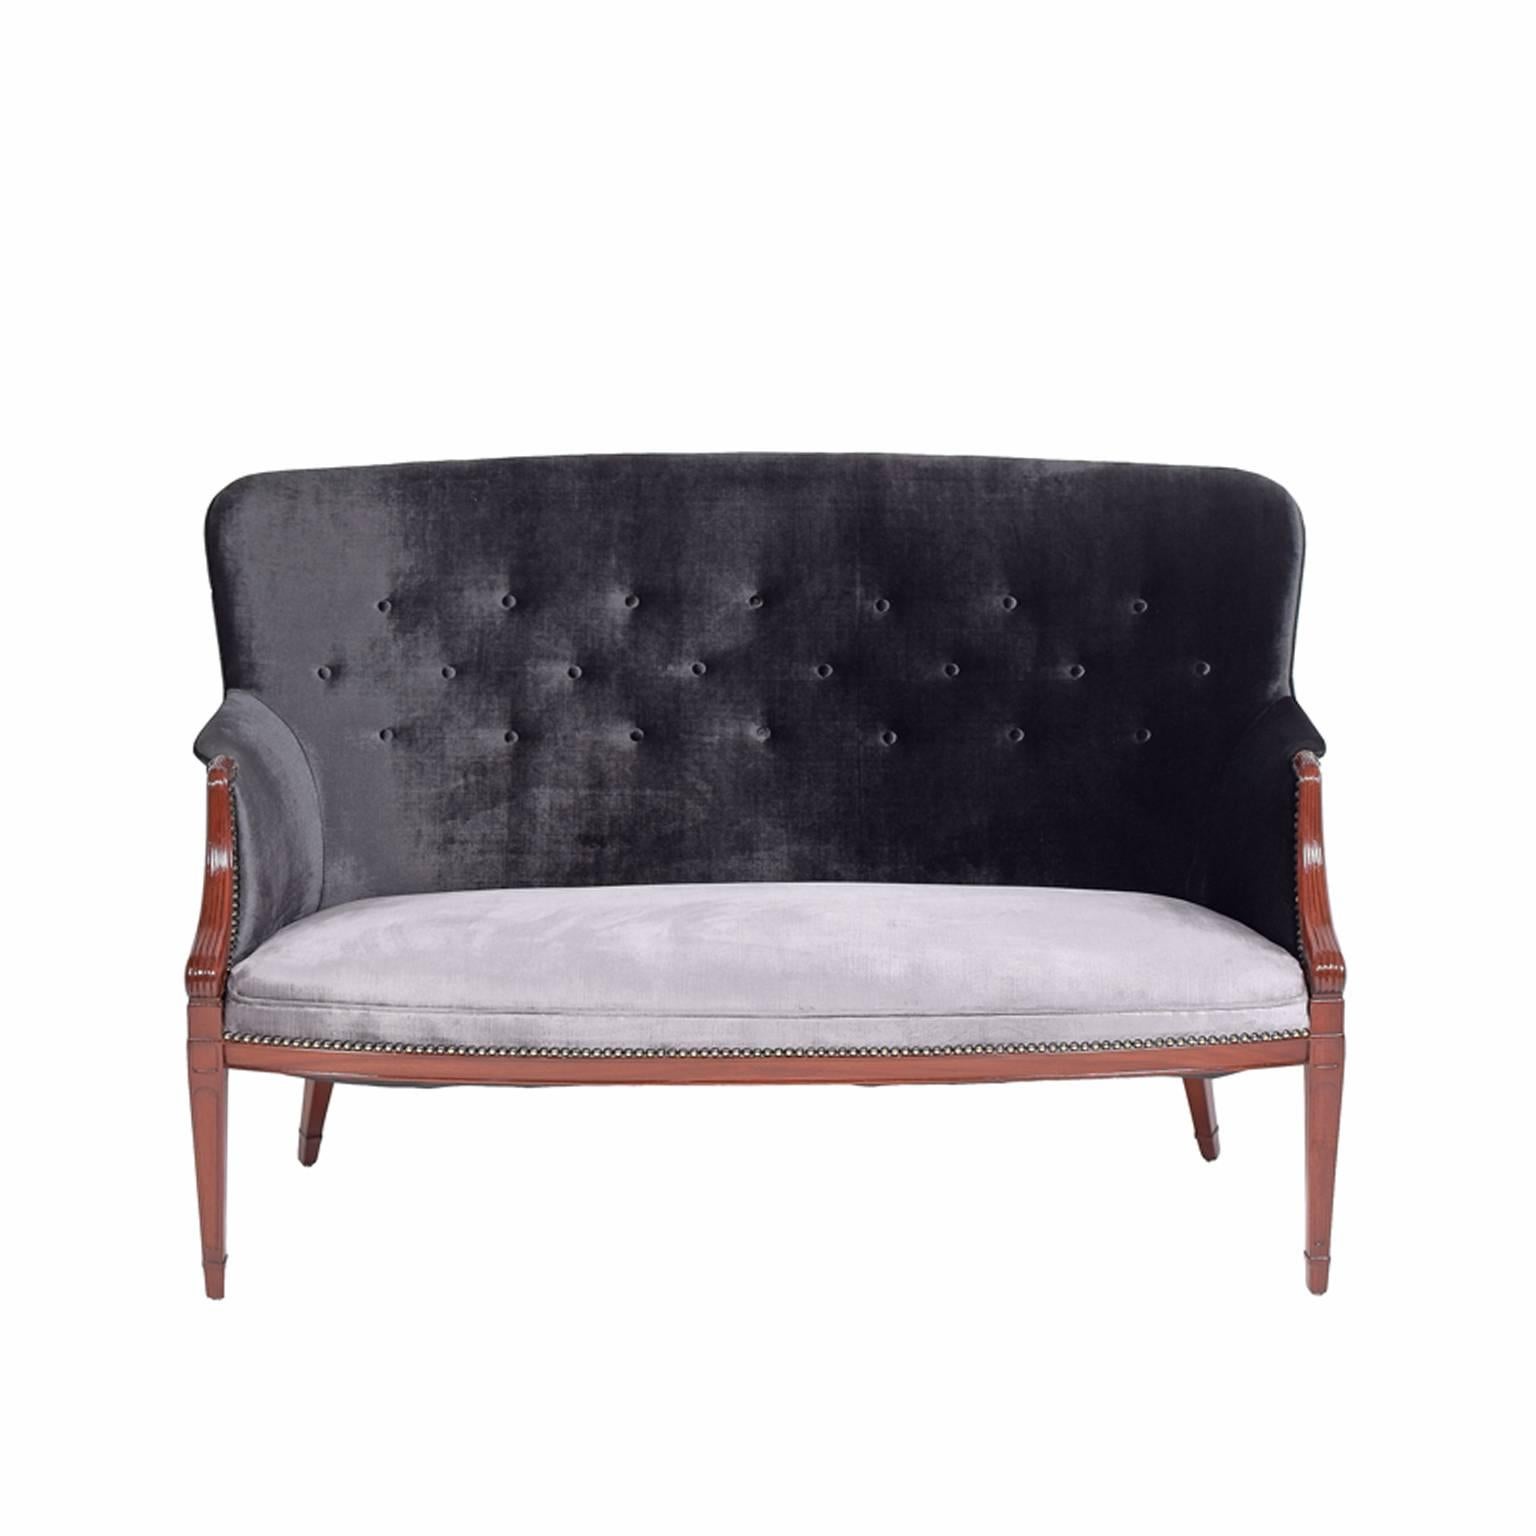 Solid mahogany two-seat sofa designed and made by Frits Henningsen in the 1940s. Two-tone velour upholstery with black upper and silver seat.